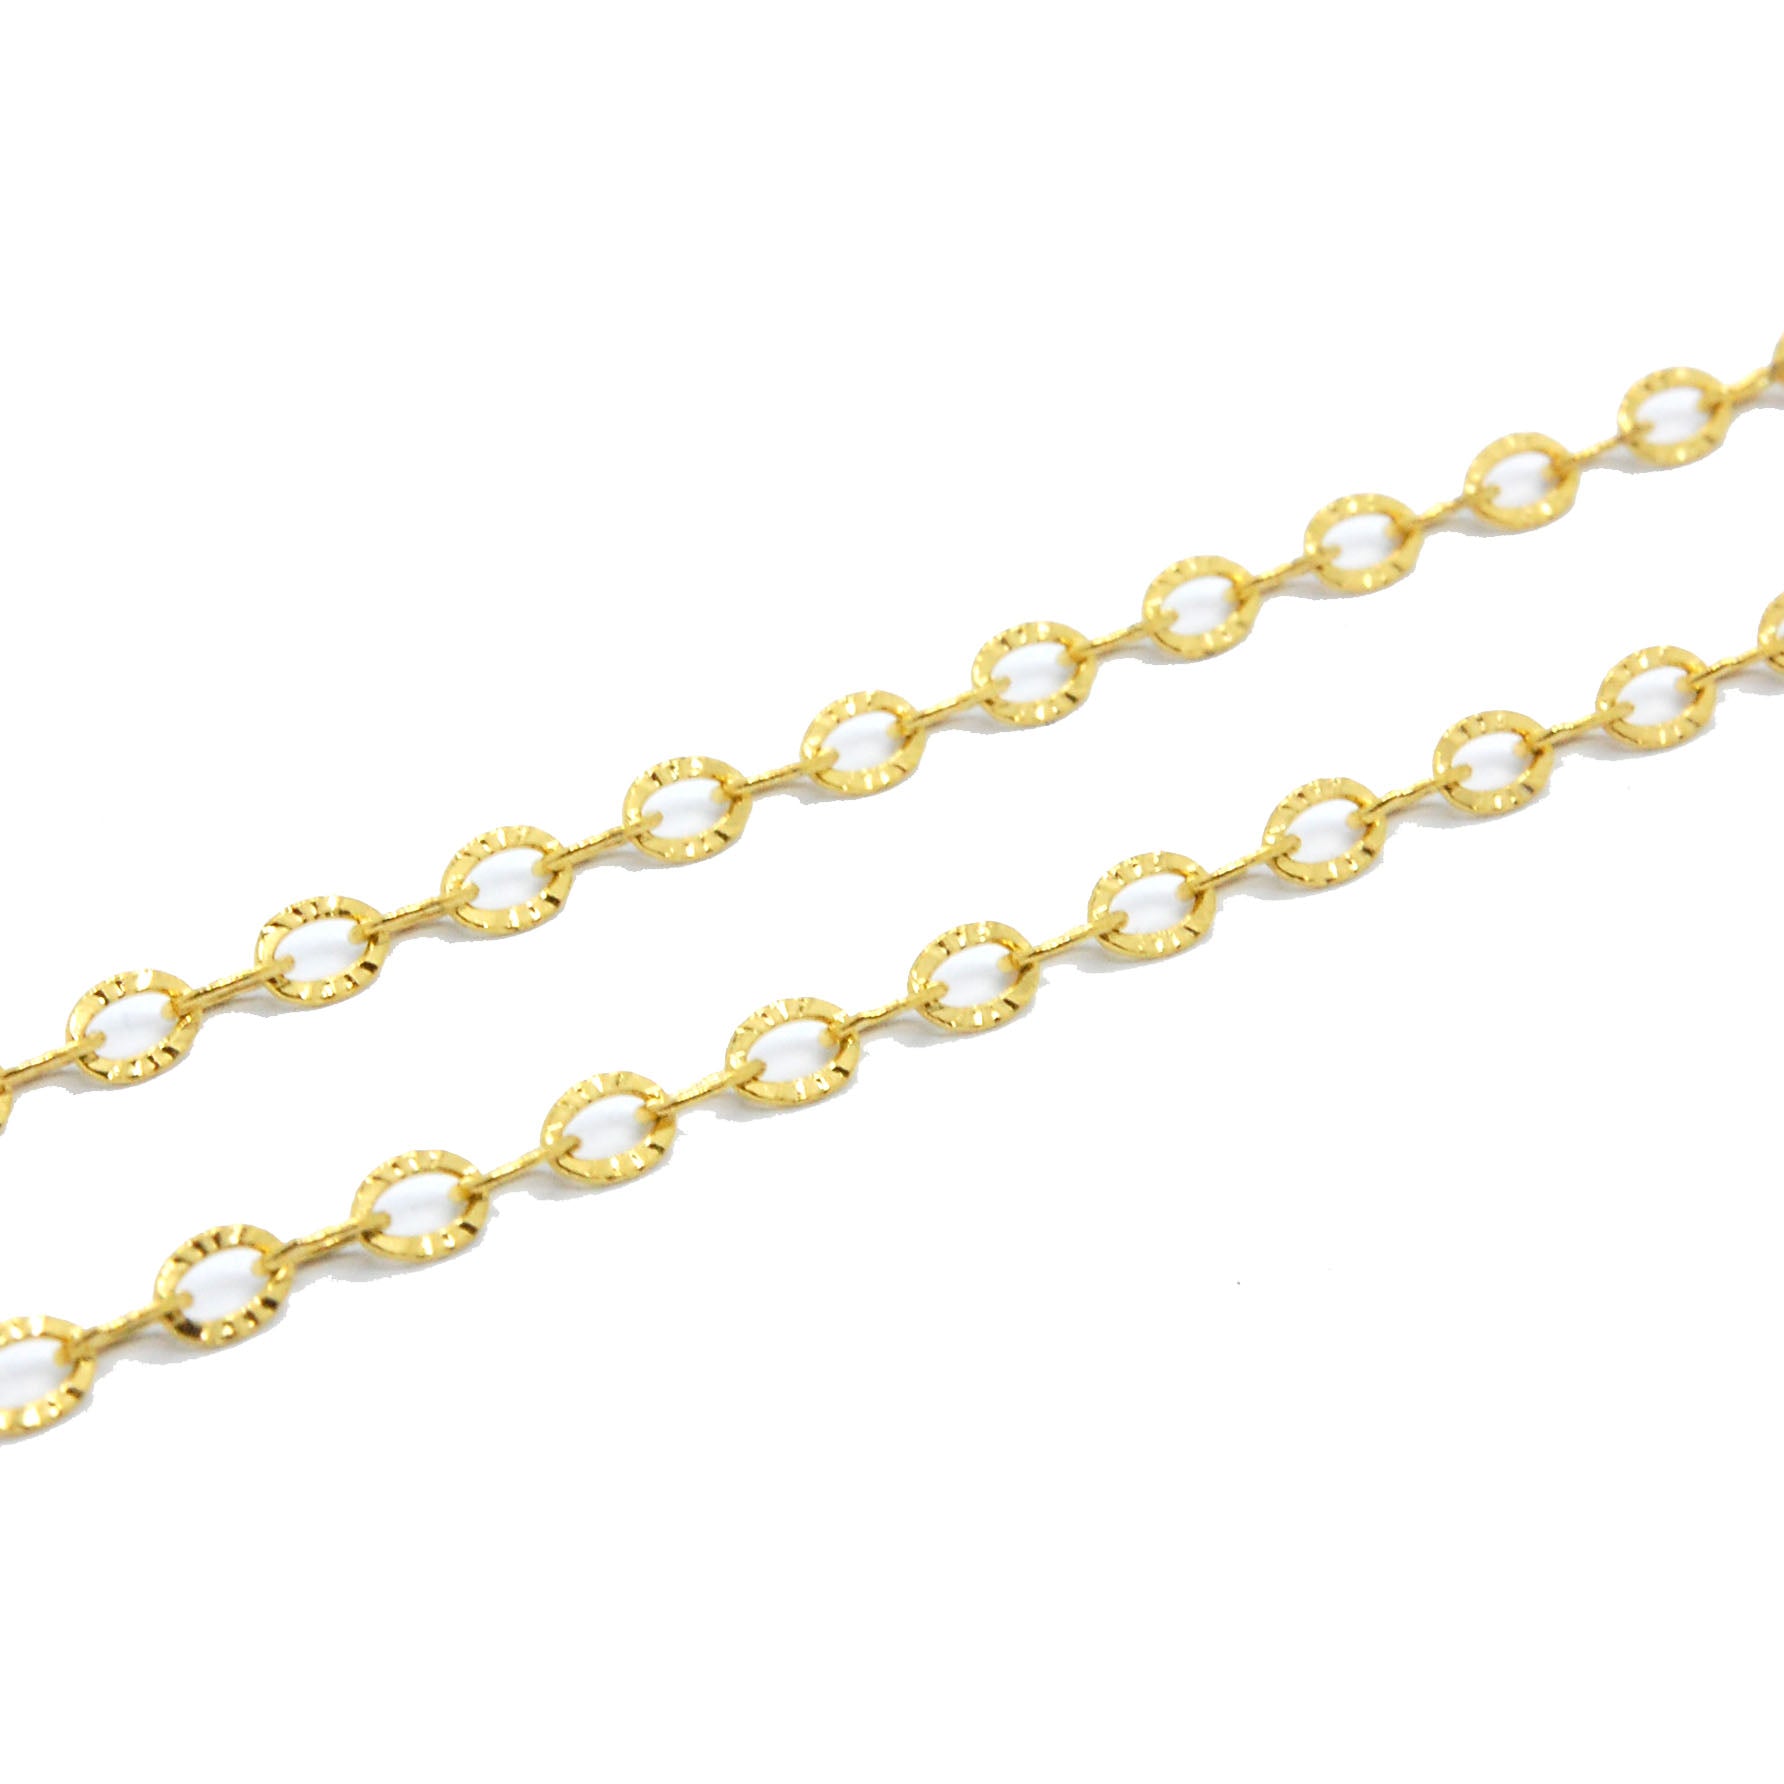 ESCH 6728: 19" Gold Plated Beautifully Etched Cable Link Chain